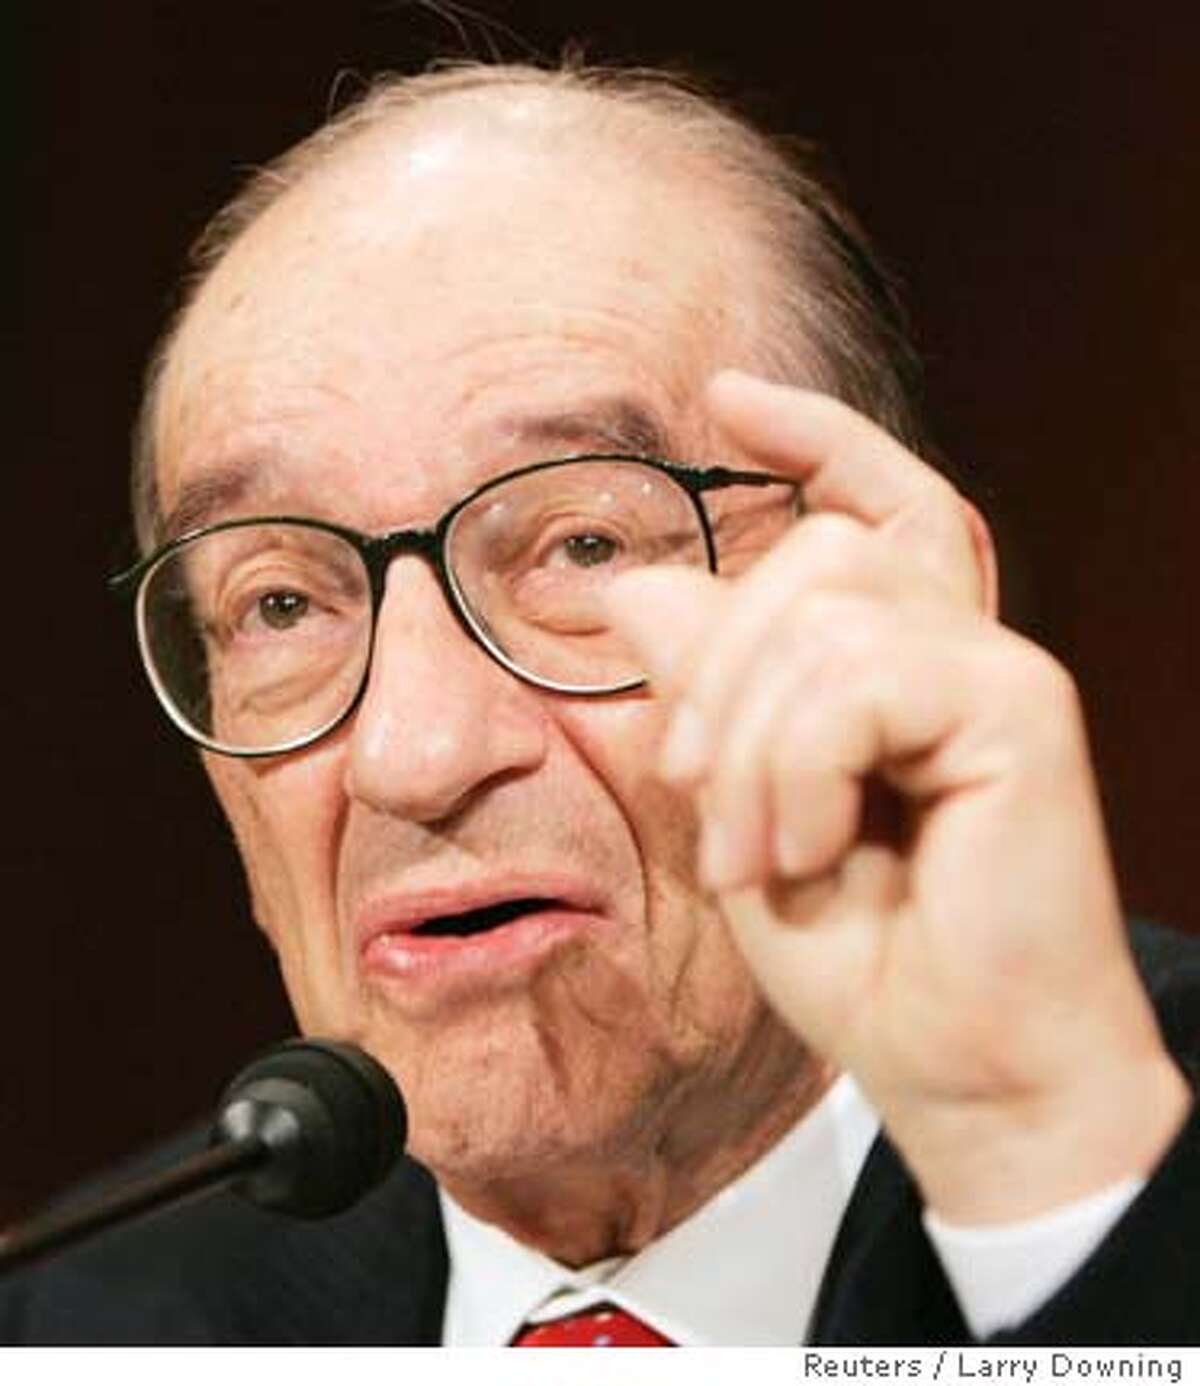 Chairman of the U.S. Federal Reserve Alan Greenspan testifies during his final scheduled testimony before the Senate Banking Committee on Capitol Hill, July 21, 2005. China's decision to let its currency rise in value is "a good start" toward better aligning the Asian trade giant's economy with the rest of the world, Greenspan said on Thursday during a session before the Senate Banking Committee. REUTERS/Larry Downing Ran on: 07-29-2005 Alan Greenspan made less than $80,700 on investments in 04. 0